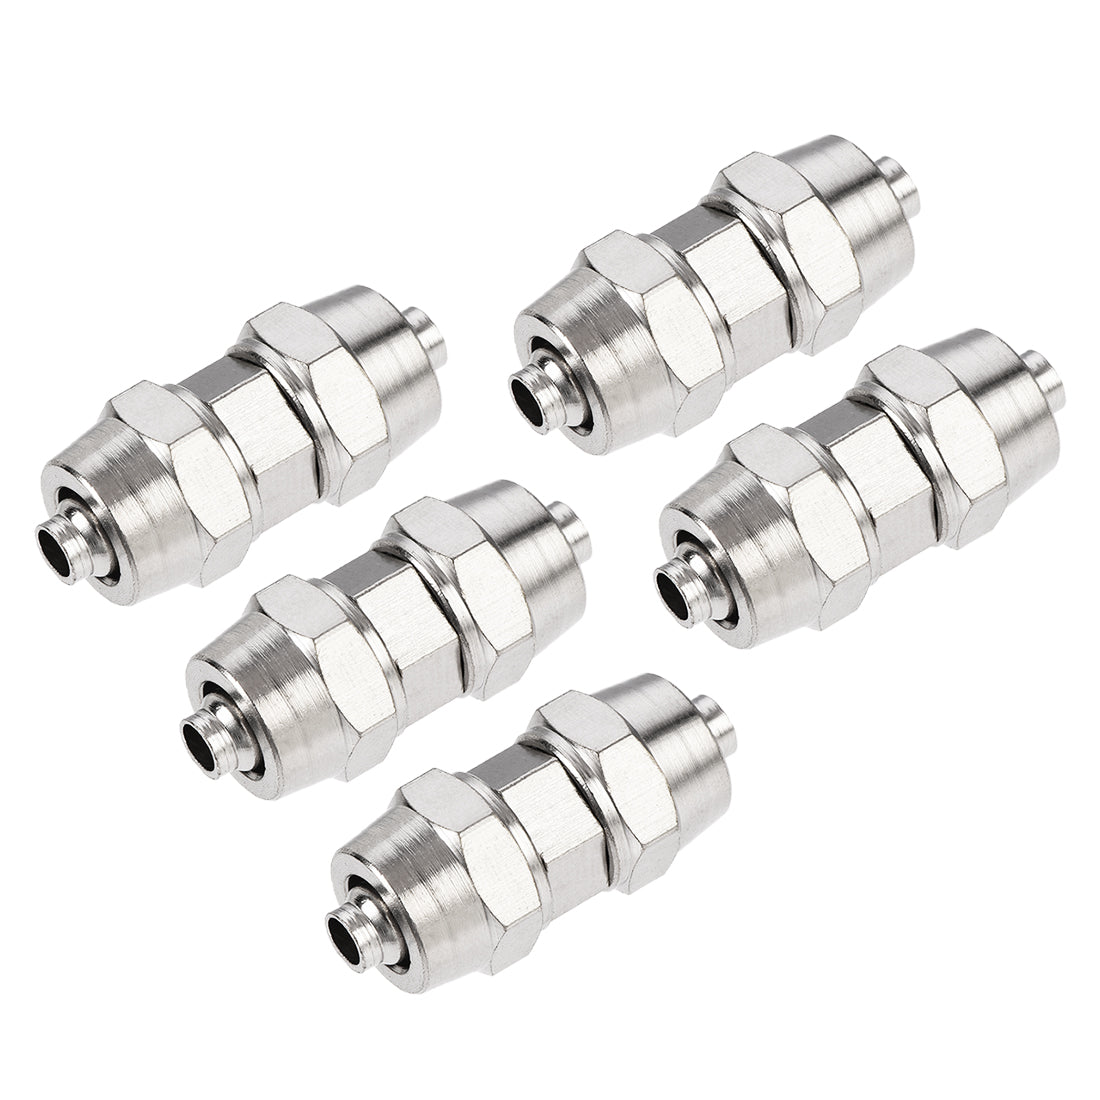 uxcell Uxcell Compression Tube Fitting Nickel Plating for 6mm Pneumatic Hose Tube 5pcs